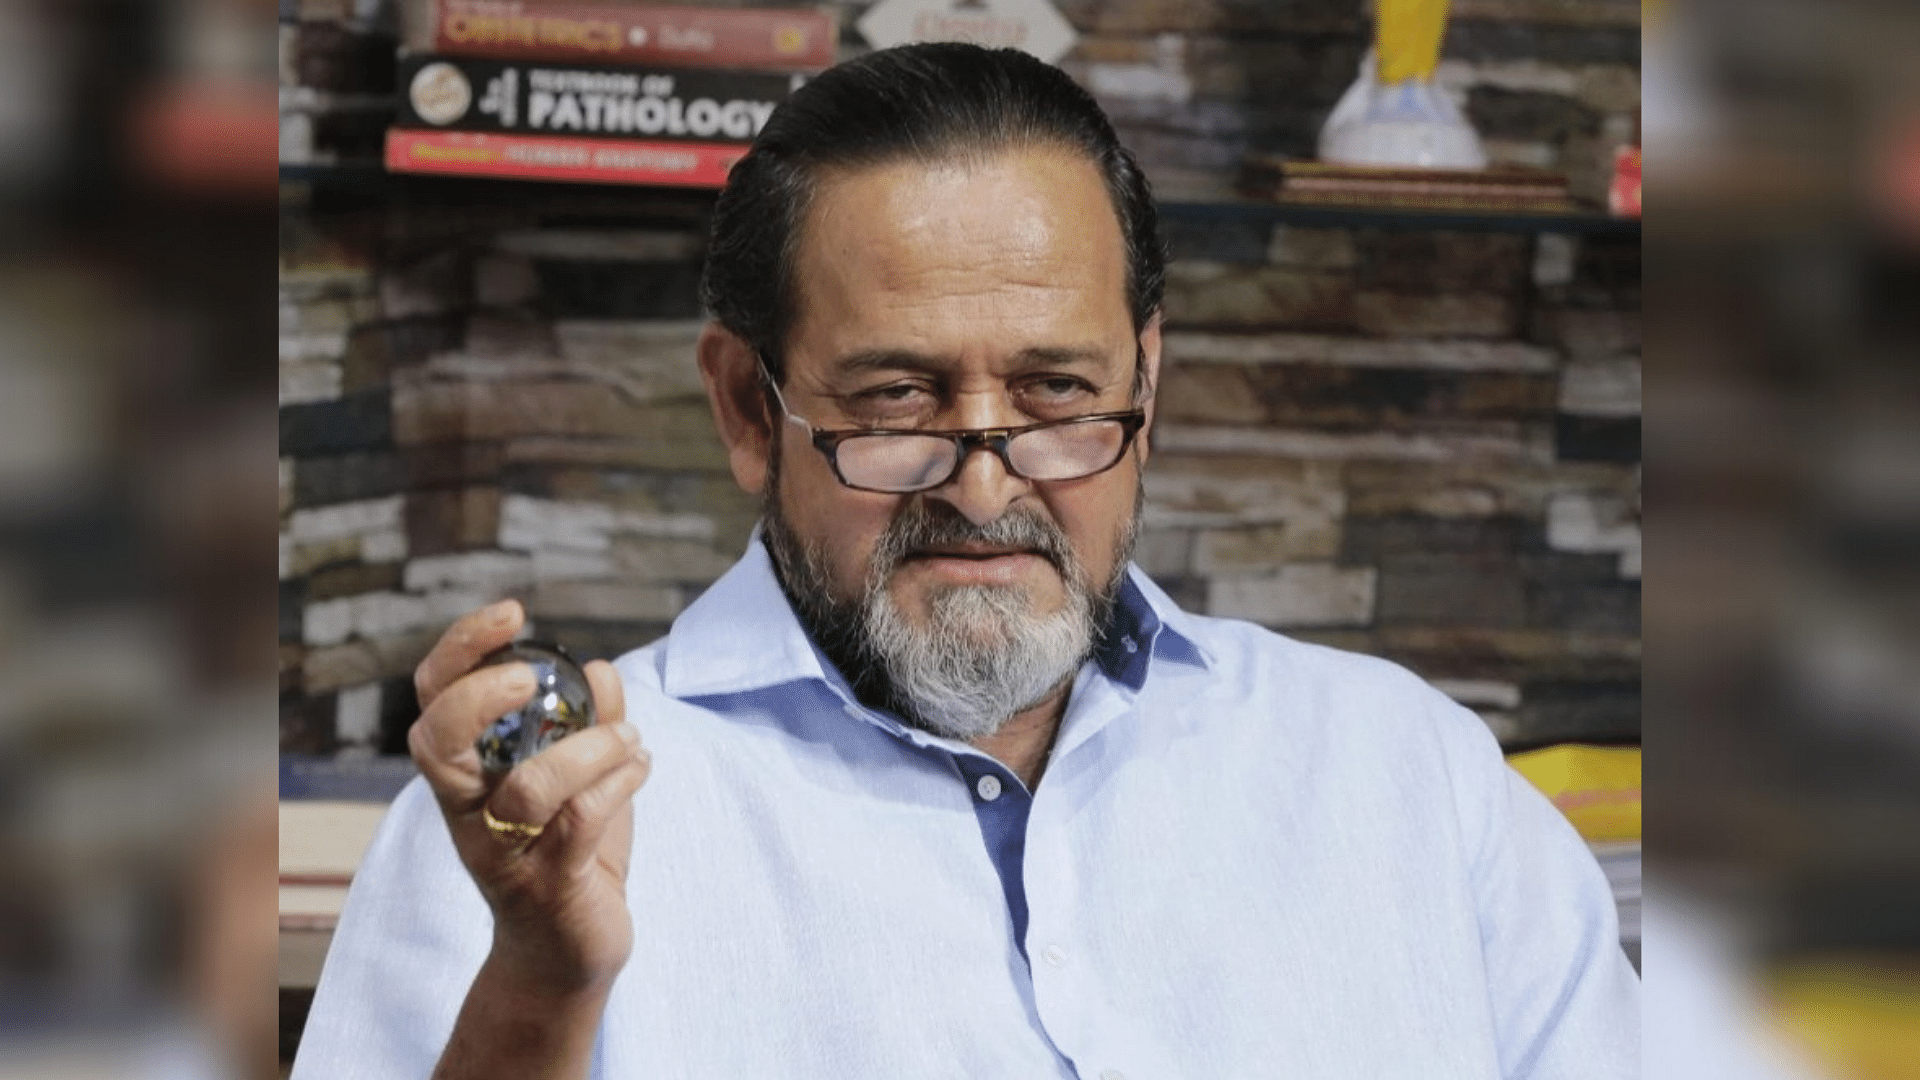 Actor Mahesh Manjrekar has been booked for allegedly slapping and verbally abusing a man.